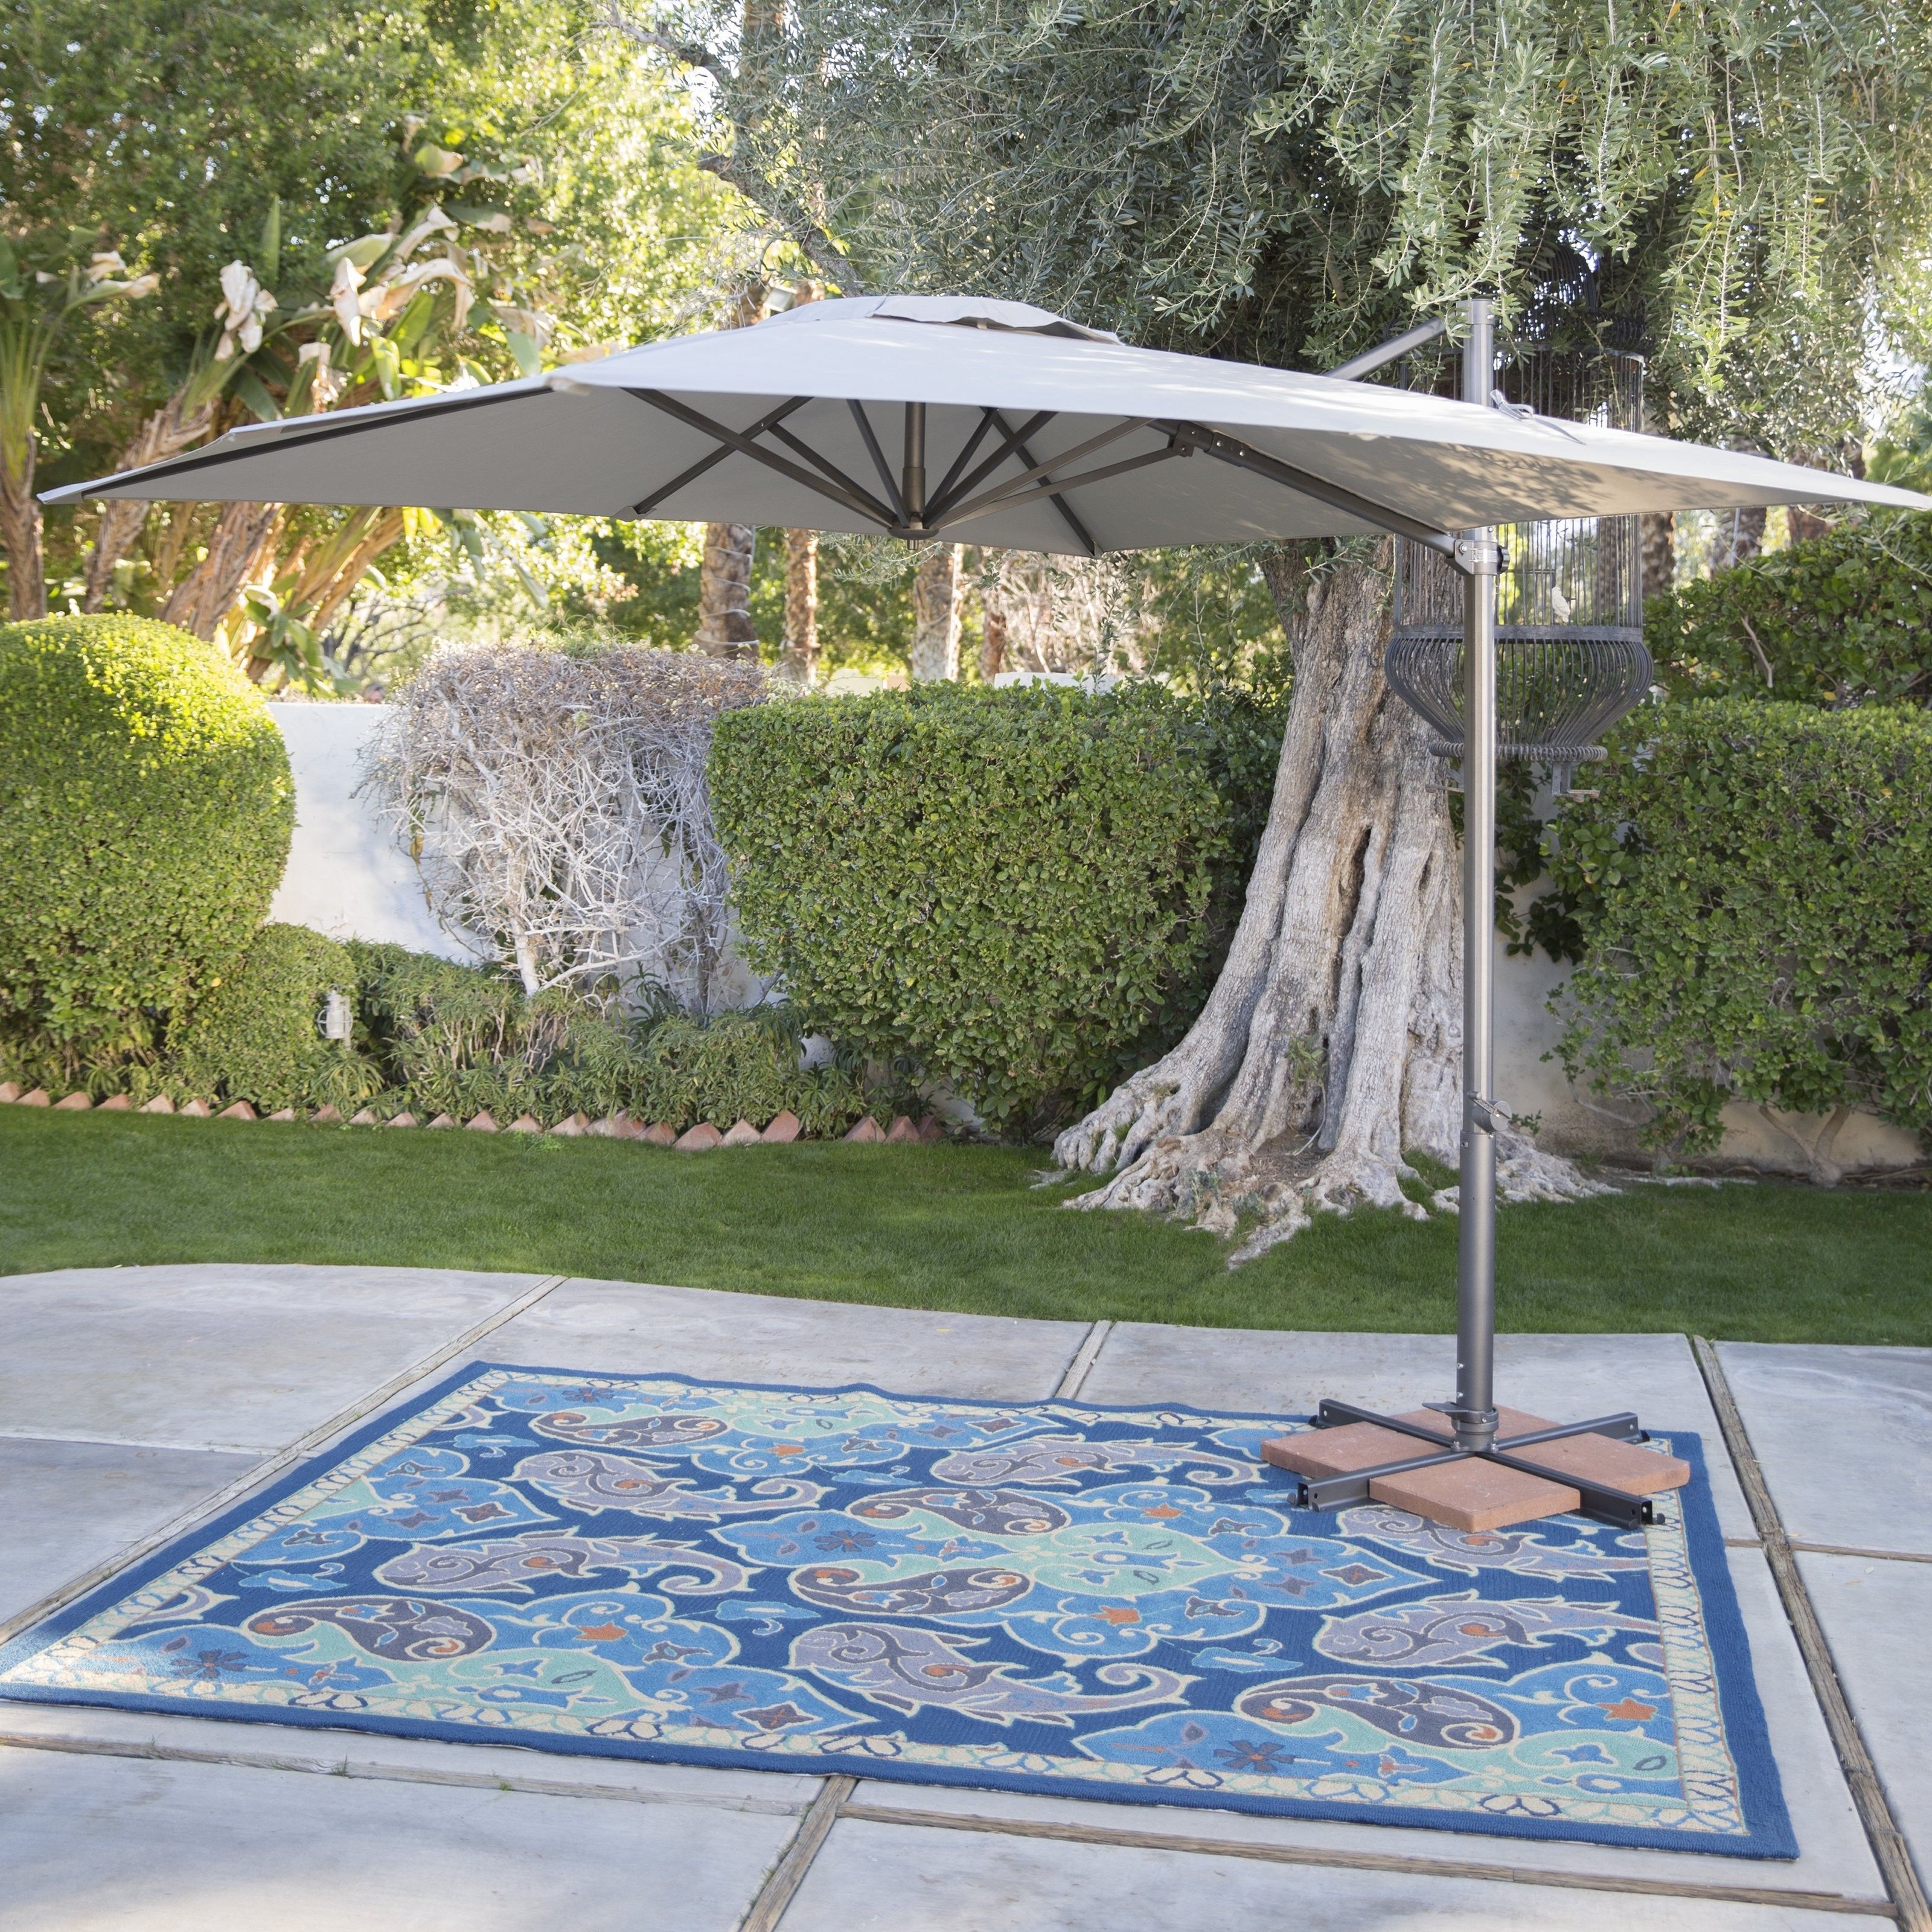 Patio Umbrella Covers Best Of Patio Umbrella Covers Target Bd On Throughout Popular Patio Umbrella Covers (View 14 of 20)